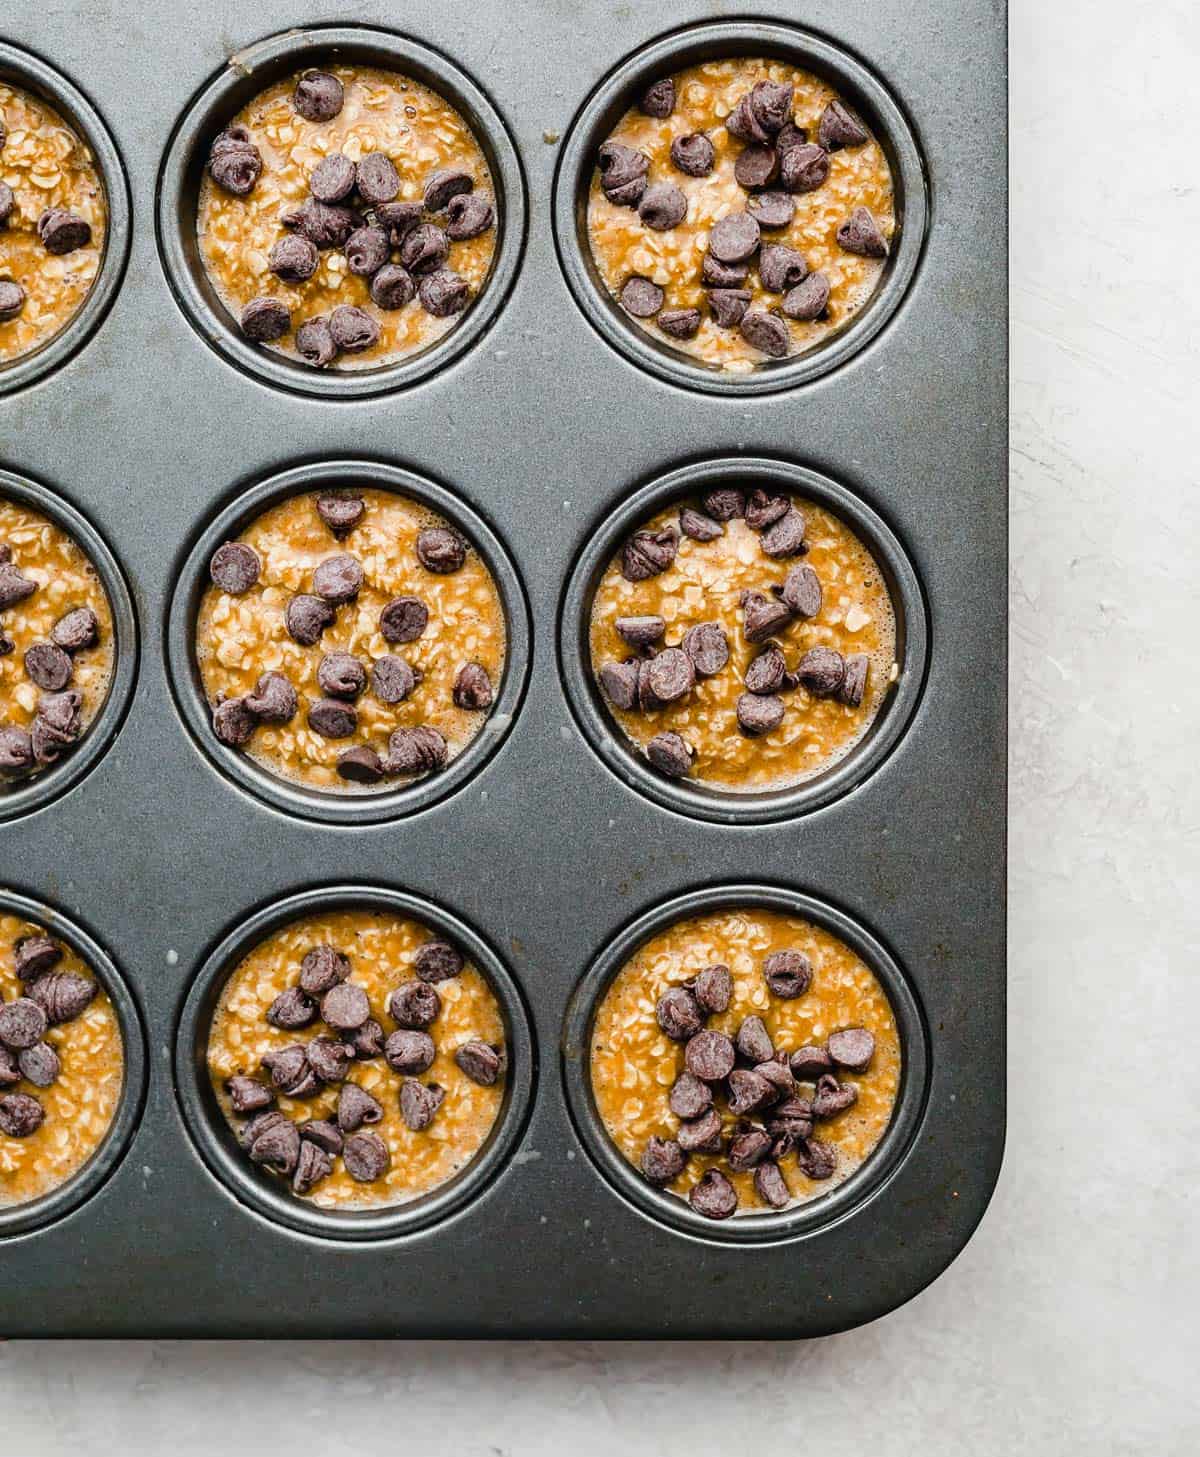 Pumpkin Baked Oatmeal Cups batter topped with chocolate chips in a muffin tin.